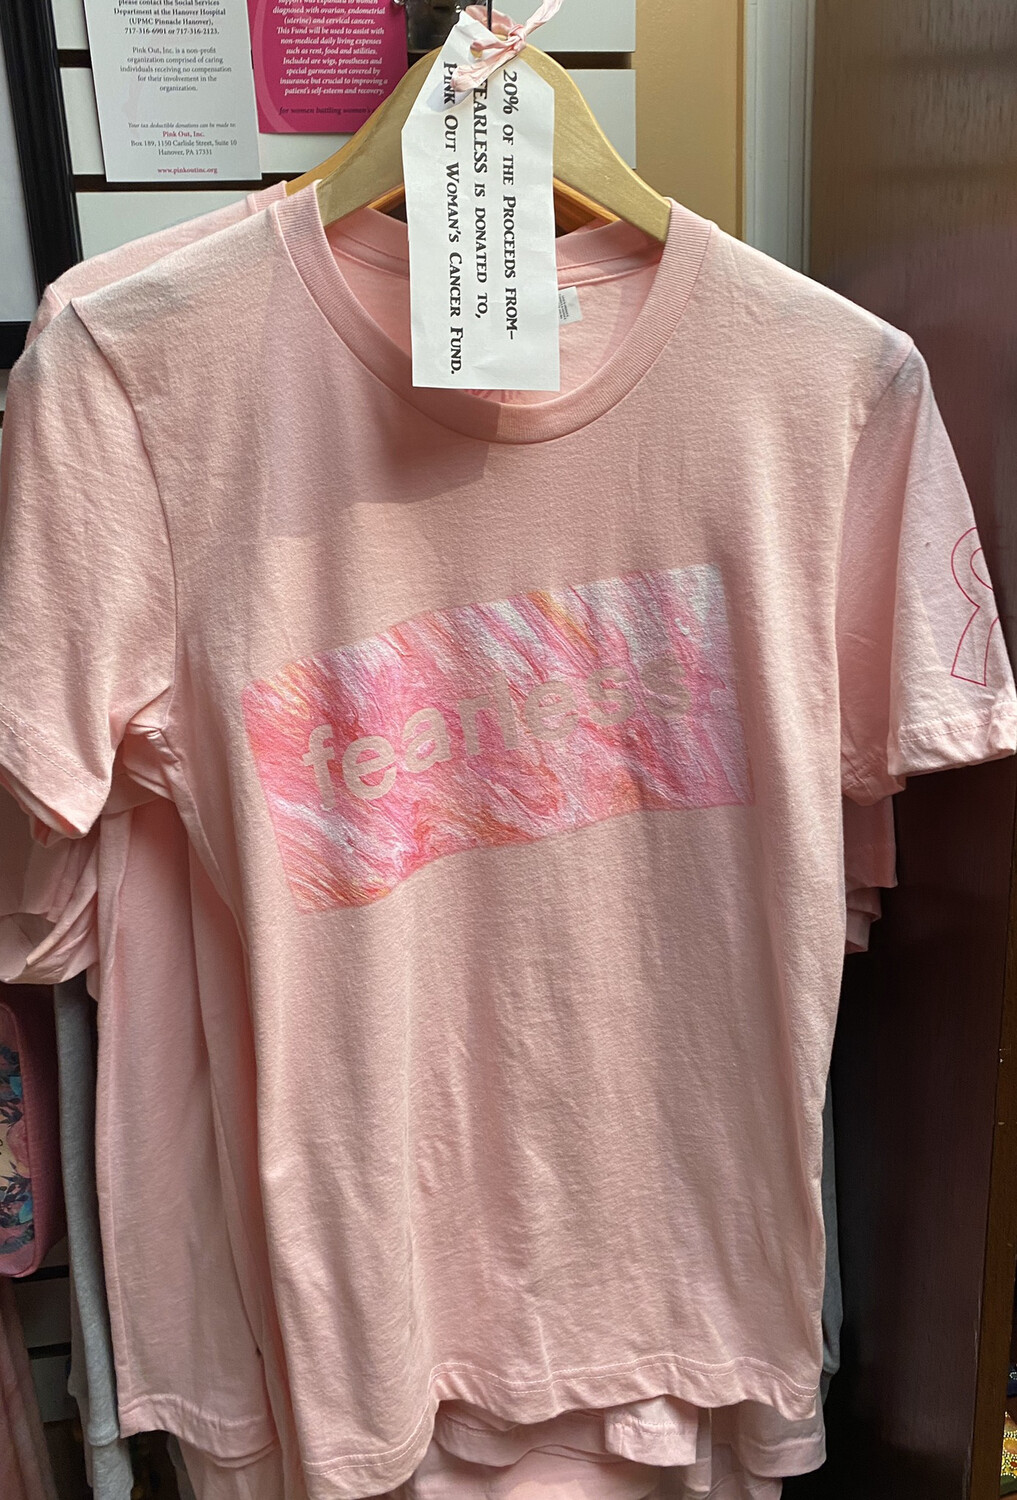 Fearless Woman’s Classic Crew T 20% Donated To Pink Our.